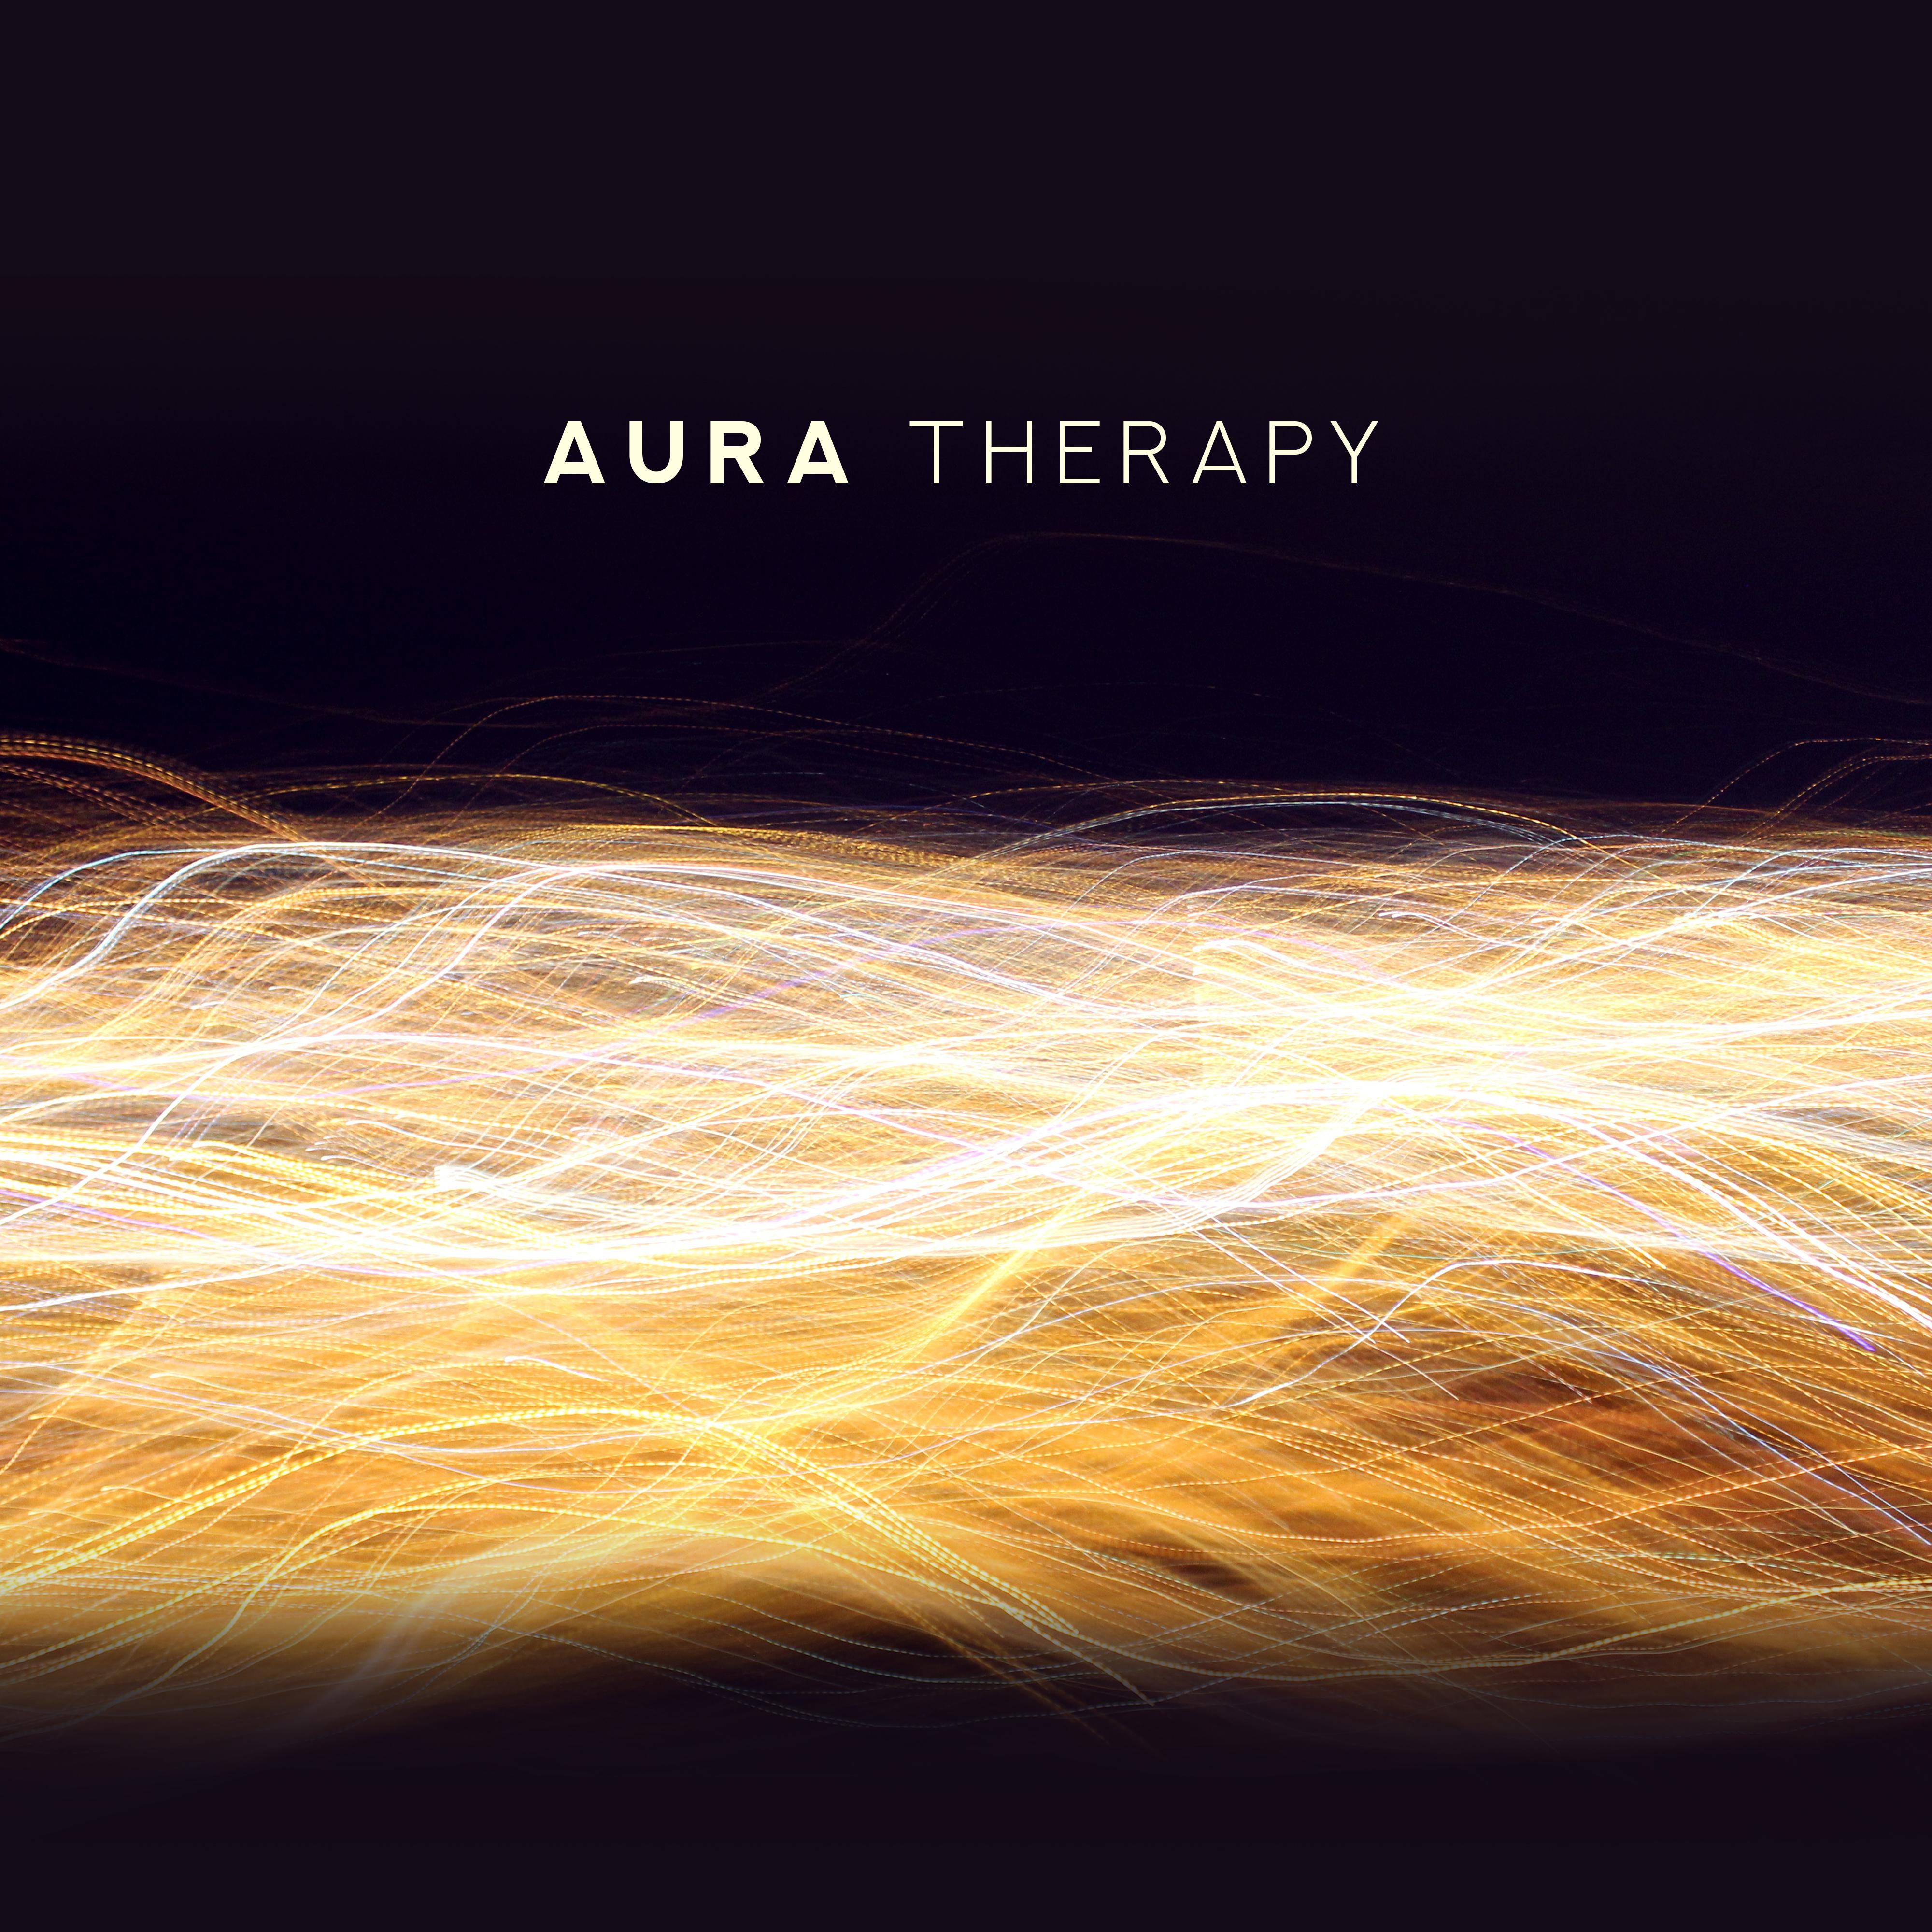 Aura Therapy: 15 Relaxing Sounds for Sleep, Rest, Deep Meditation, Deep Harmony, Zen Lounge, Relaxation Music 2019, Chillout Zone